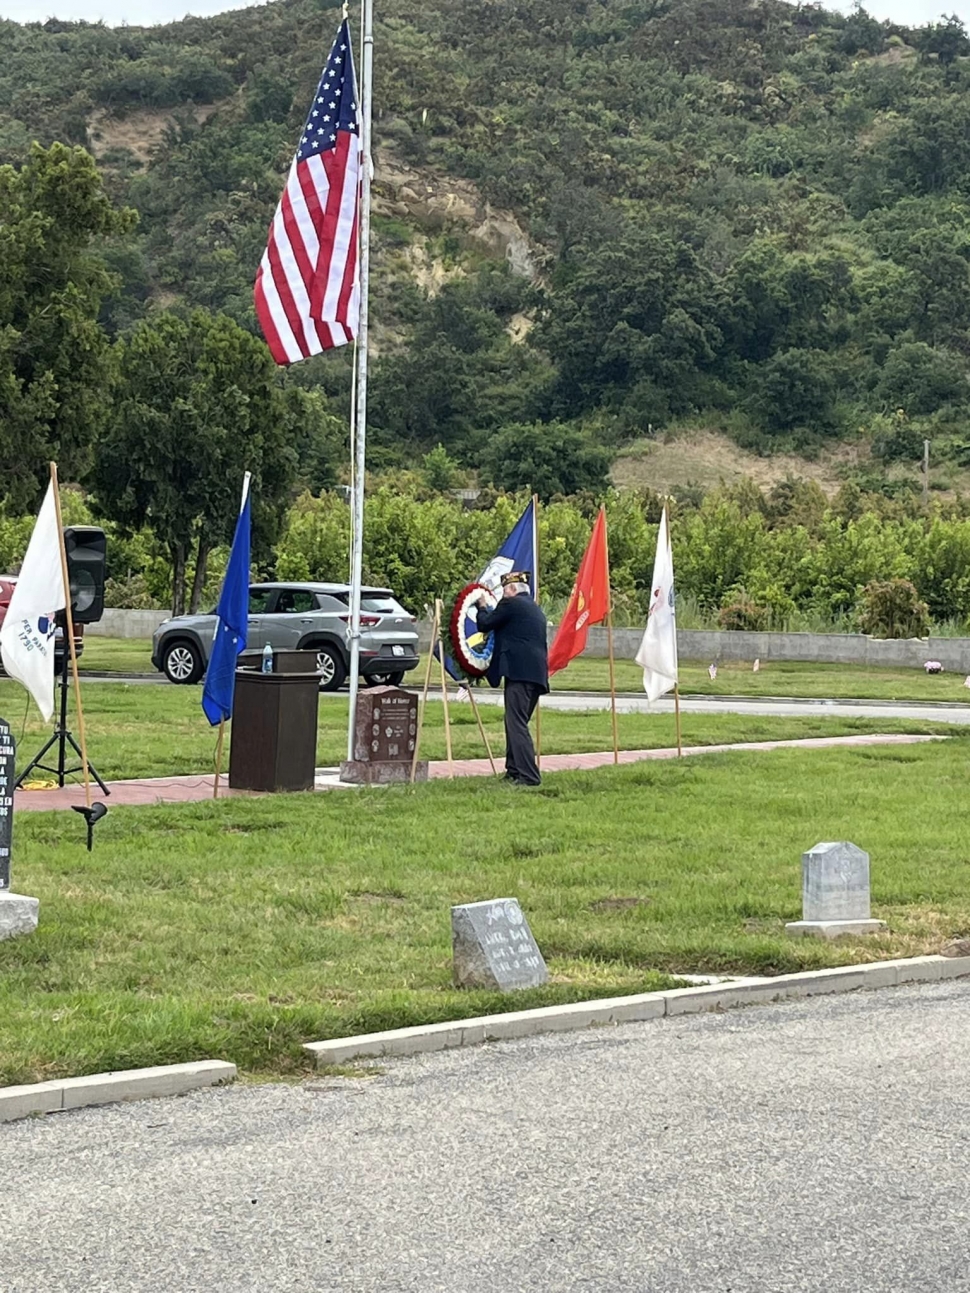 On Monday, May 29th at 11am, Bardsdale Cemetery held a Memorial Day Ceremony featured speaker this year was Marc Allen.
Reverend Bob Hammond, of St. Stephens Anglican Church, gave the Inspirational Message. Assisting the ceremony was VFW Post 9637, Boy Scout Troop 406, Cub Scout Troop 3400 and Bill Morris. The Boy Scouts and Bardsdale 4H put out the American flags as well as picked them up.